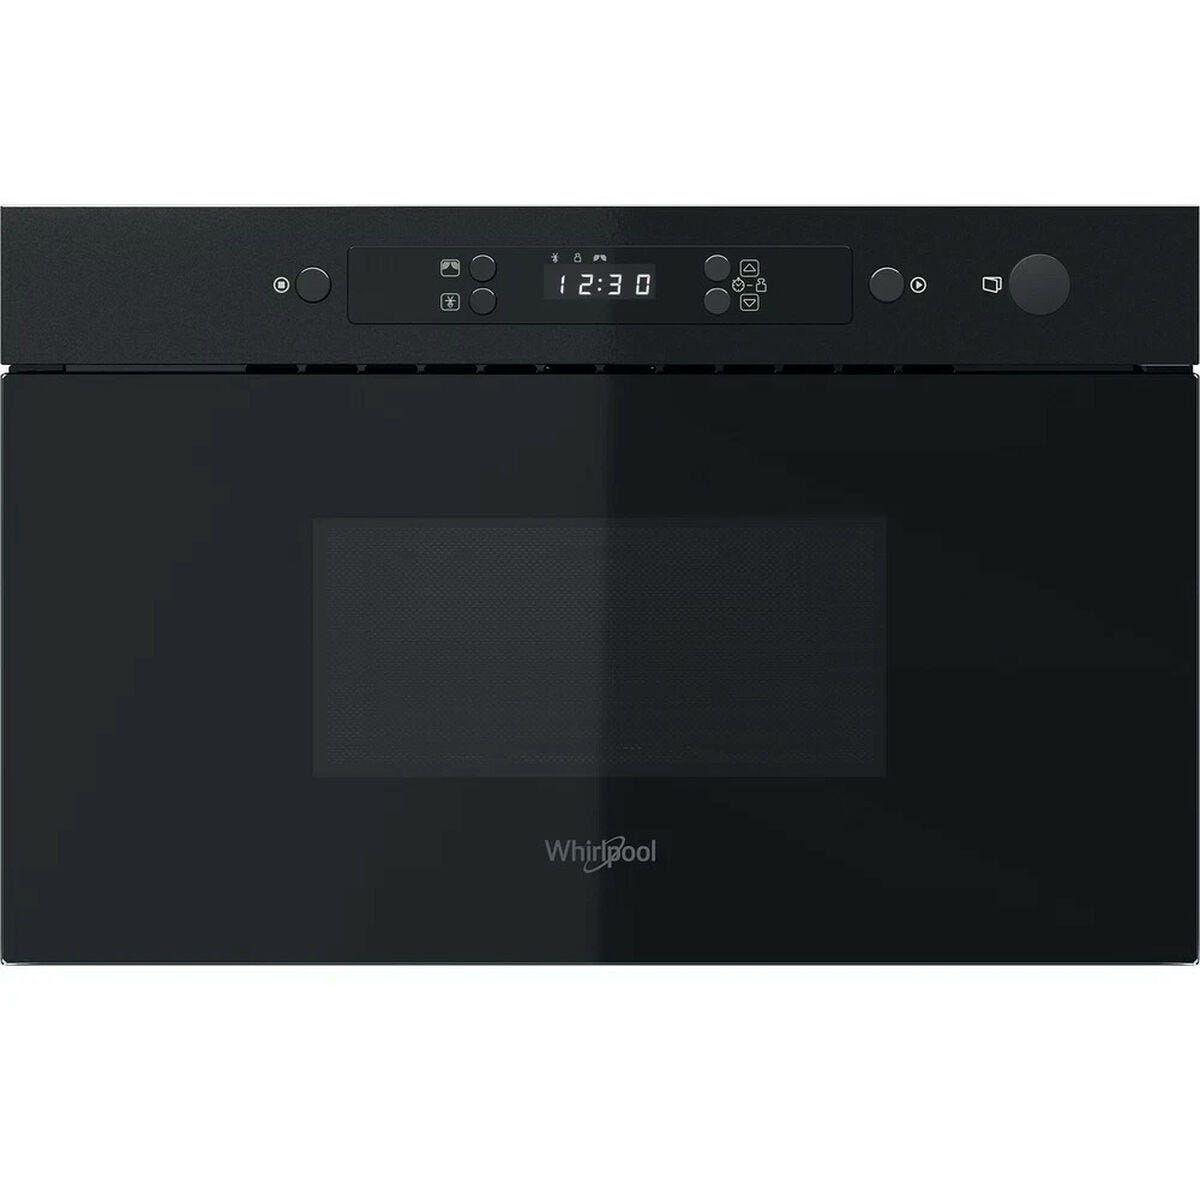 Micro-ondes intégrable avec grill Whirlpool Corporation MBNA900B 22 L 750 W